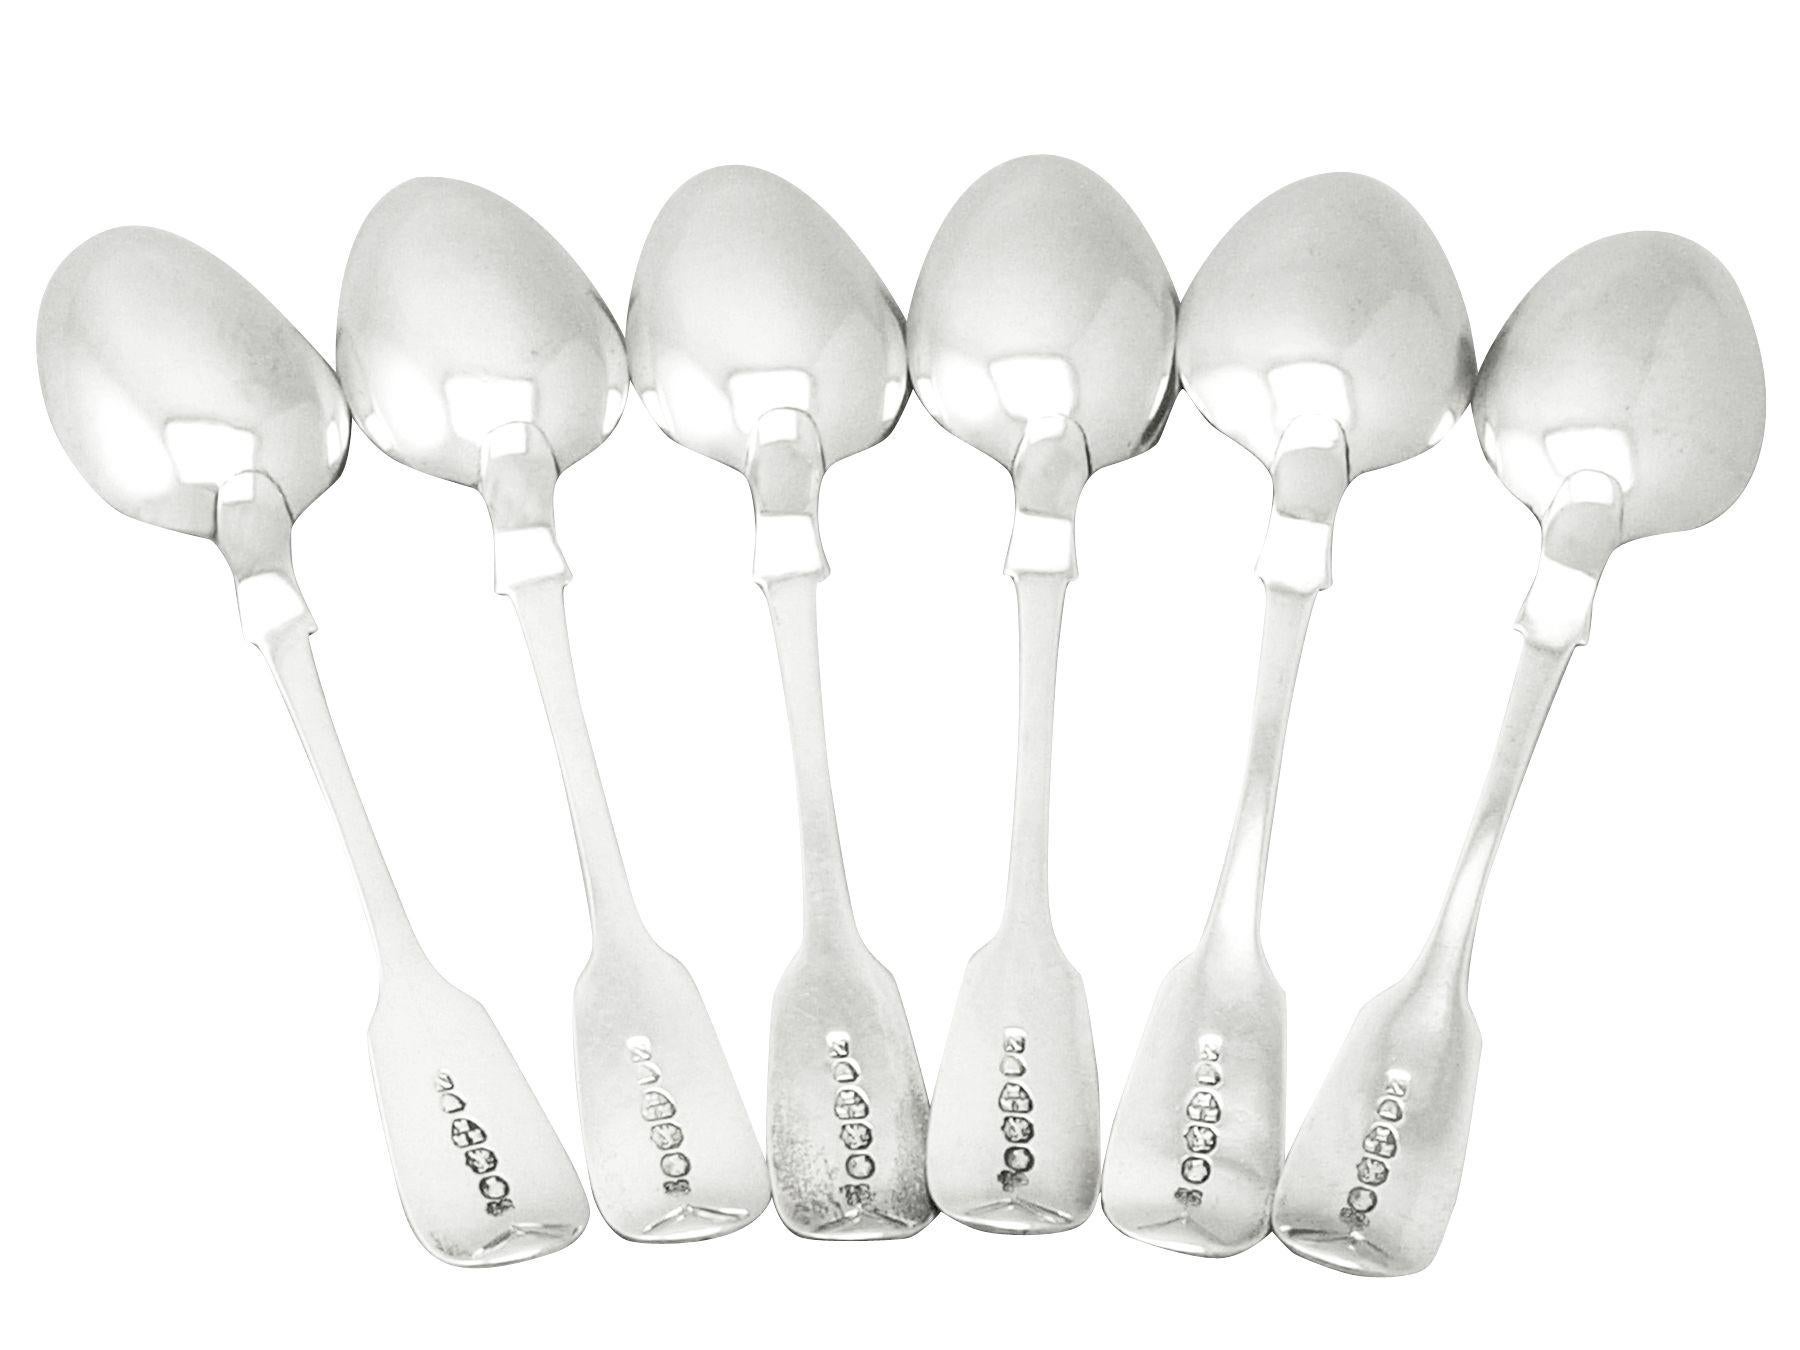 A fine and impressive set of six antique Victorian Newcastle sterling silver Fiddle pattern teaspoons; an addition to our silver teaware collection.

These fine antique Victorian Newcastle sterling silver teaspoons have been crafted in Fiddle